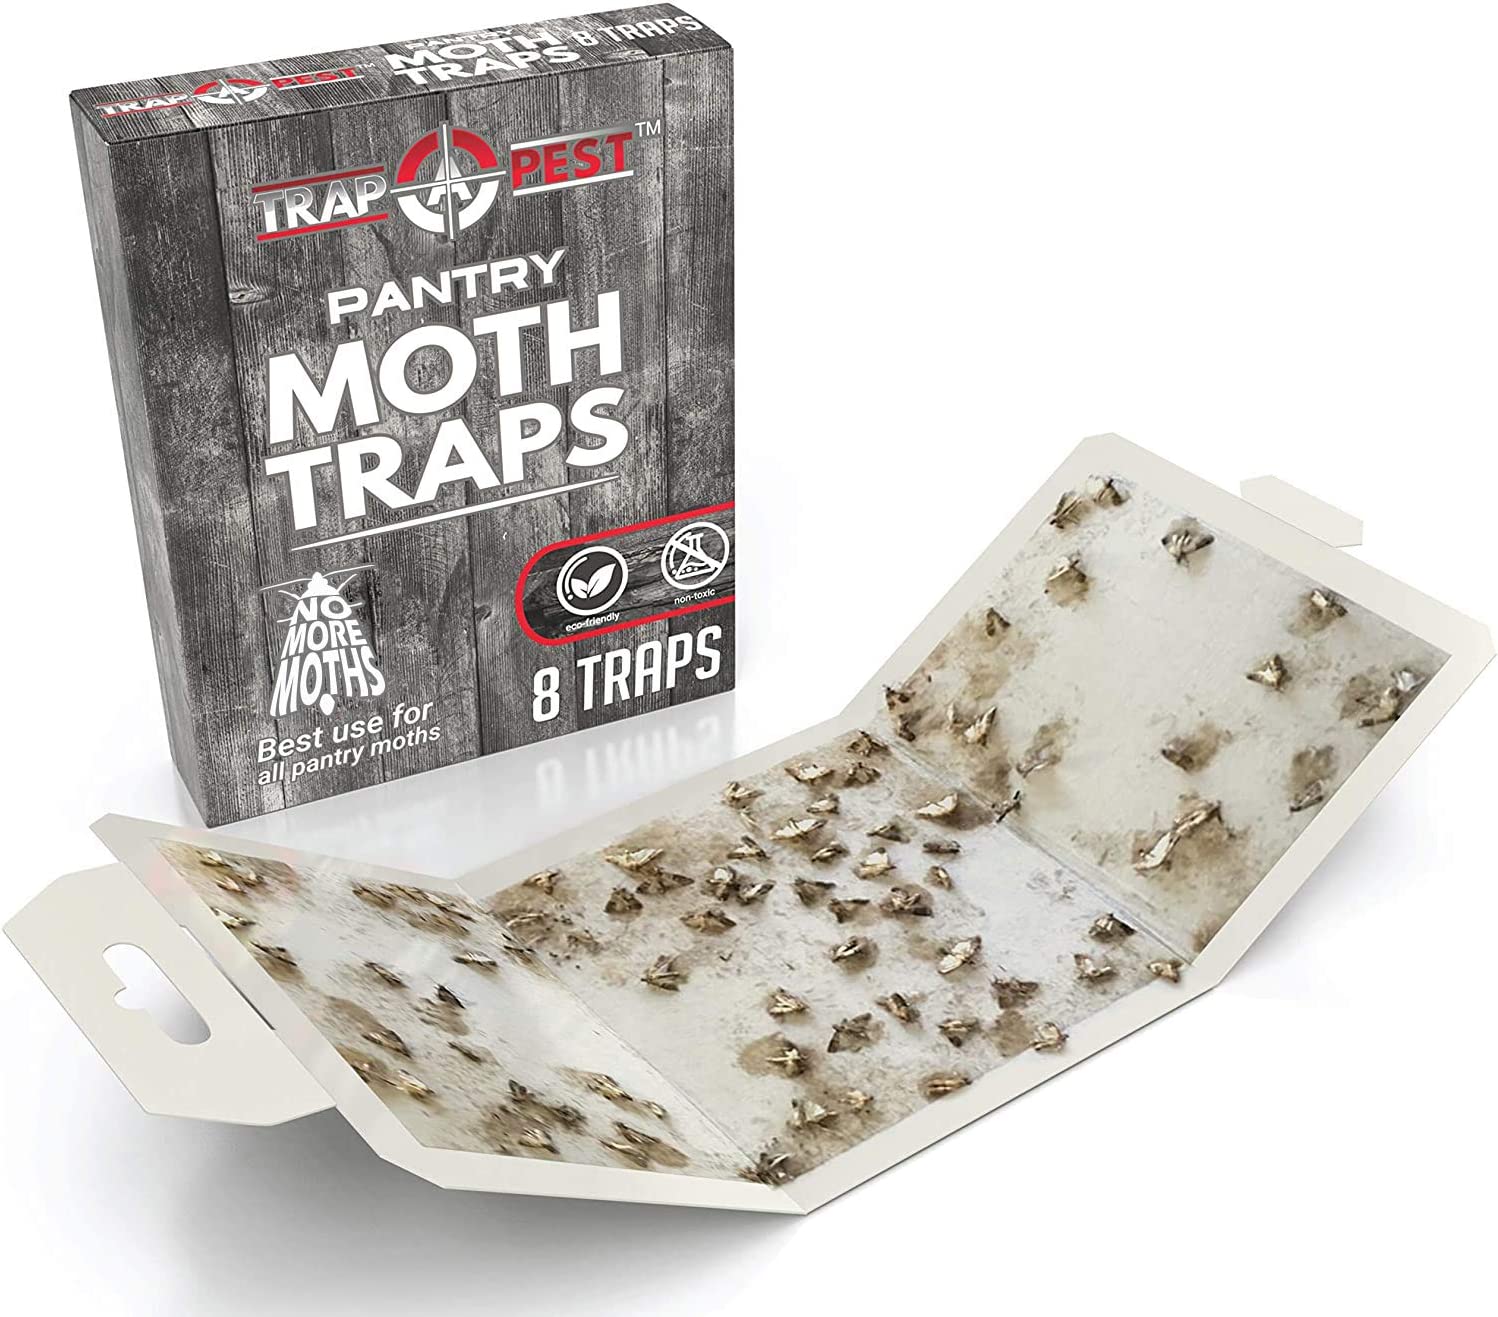 Maxguard Pantry Moth Traps (8 Pack) with Extra Strength Pheromones |  Non-Toxic Sticky Glue Trap for Food and Cupboard Moths in Your Kitchen |  Trap 